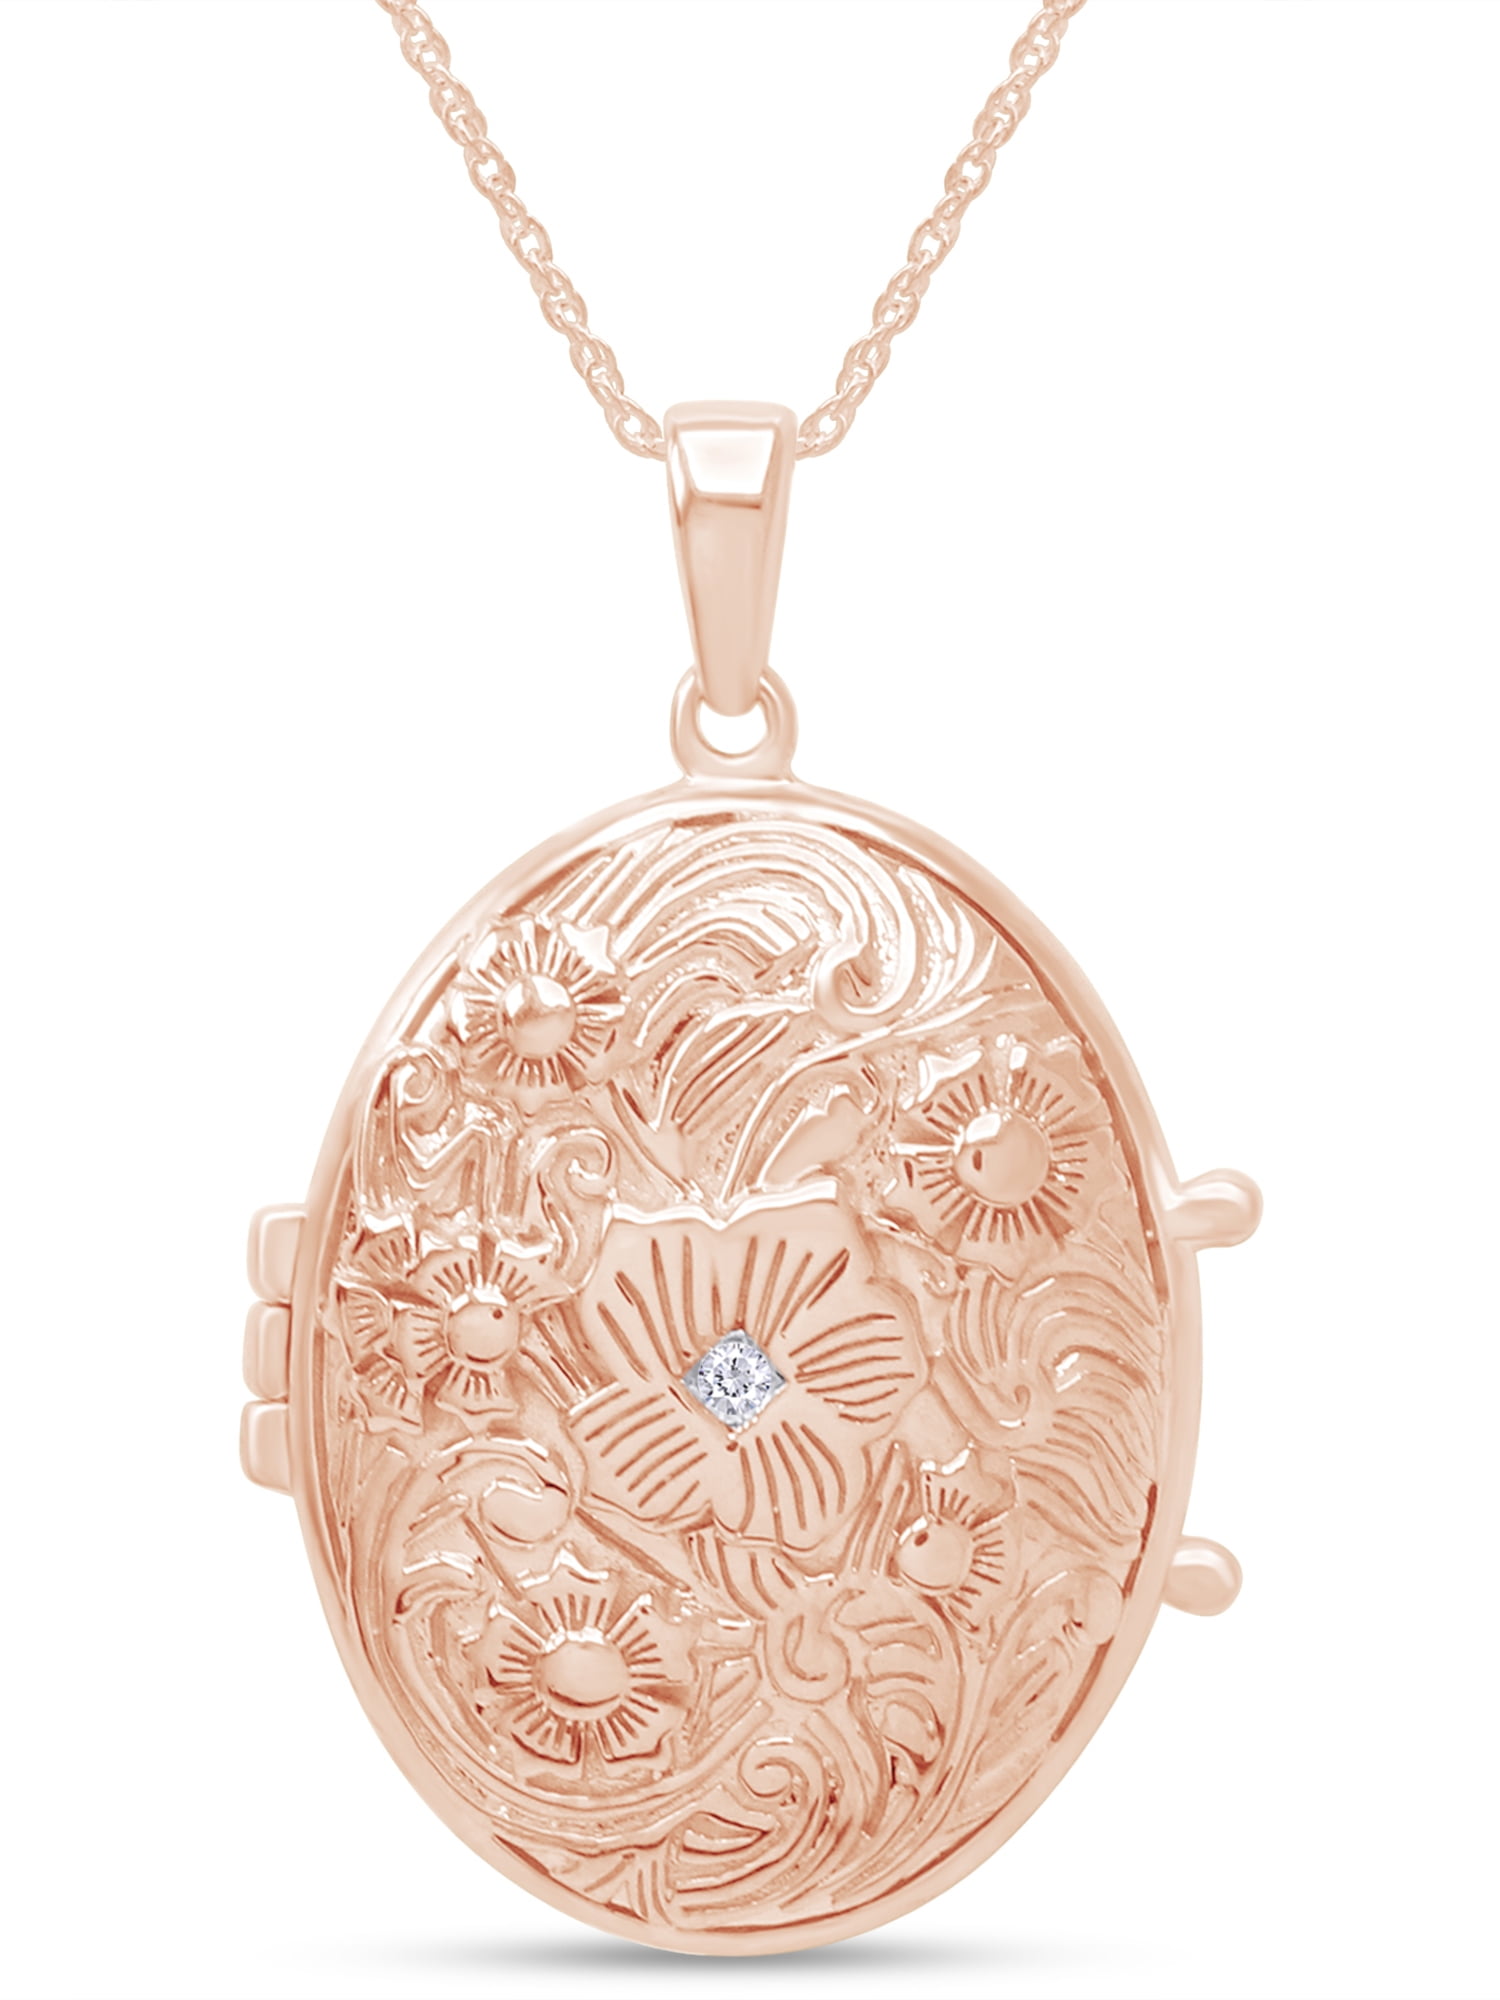 Details about   4 Ct Oval Solitaire Pink Sapphire Necklace Women Jewelry 14K Rose Gold Plated 